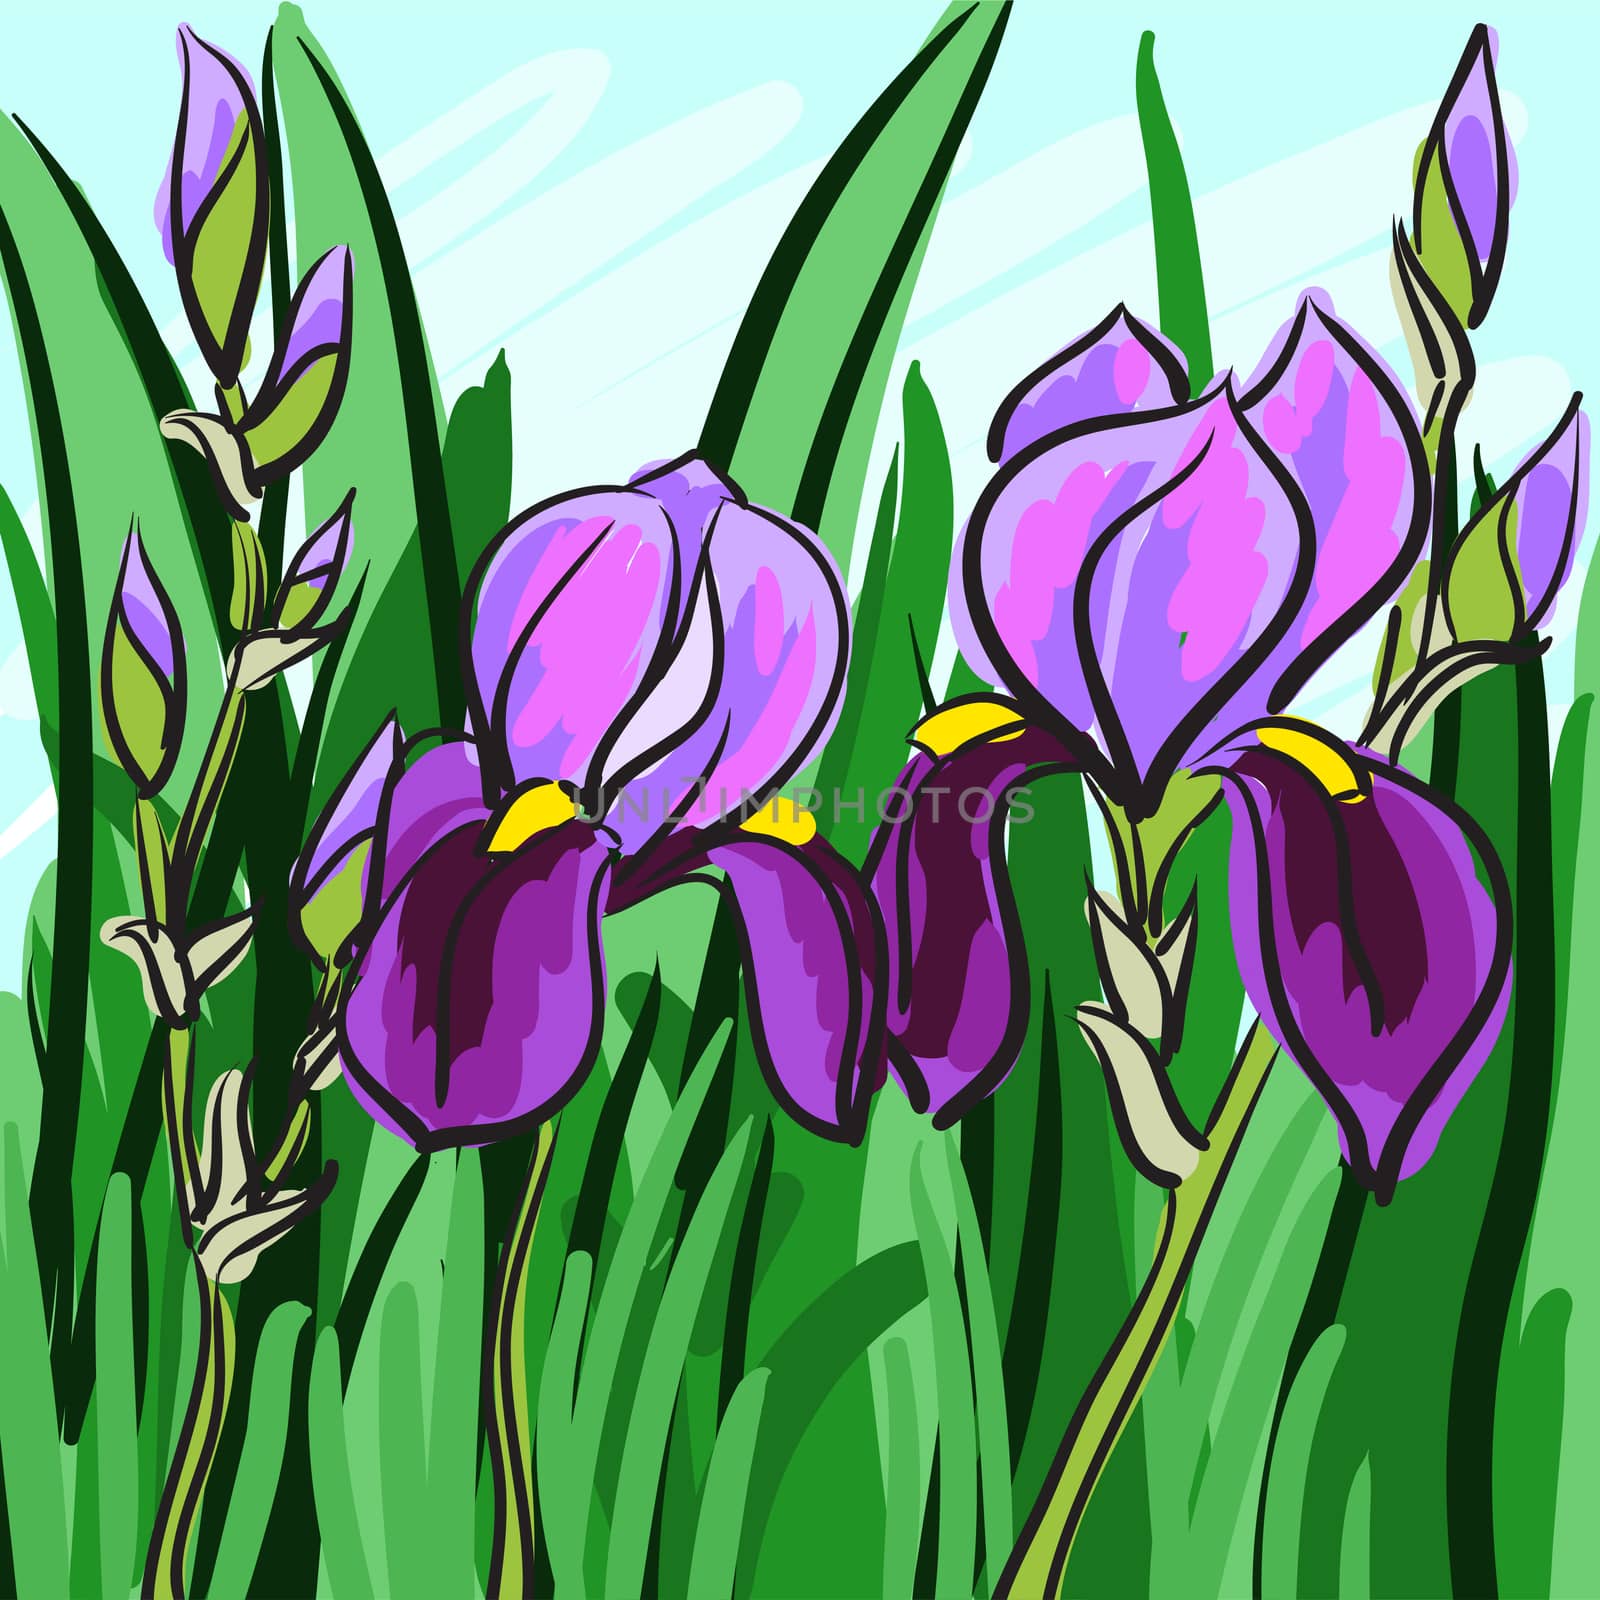 Violet iris hand-drawn on green background for your design. by Adamchuk